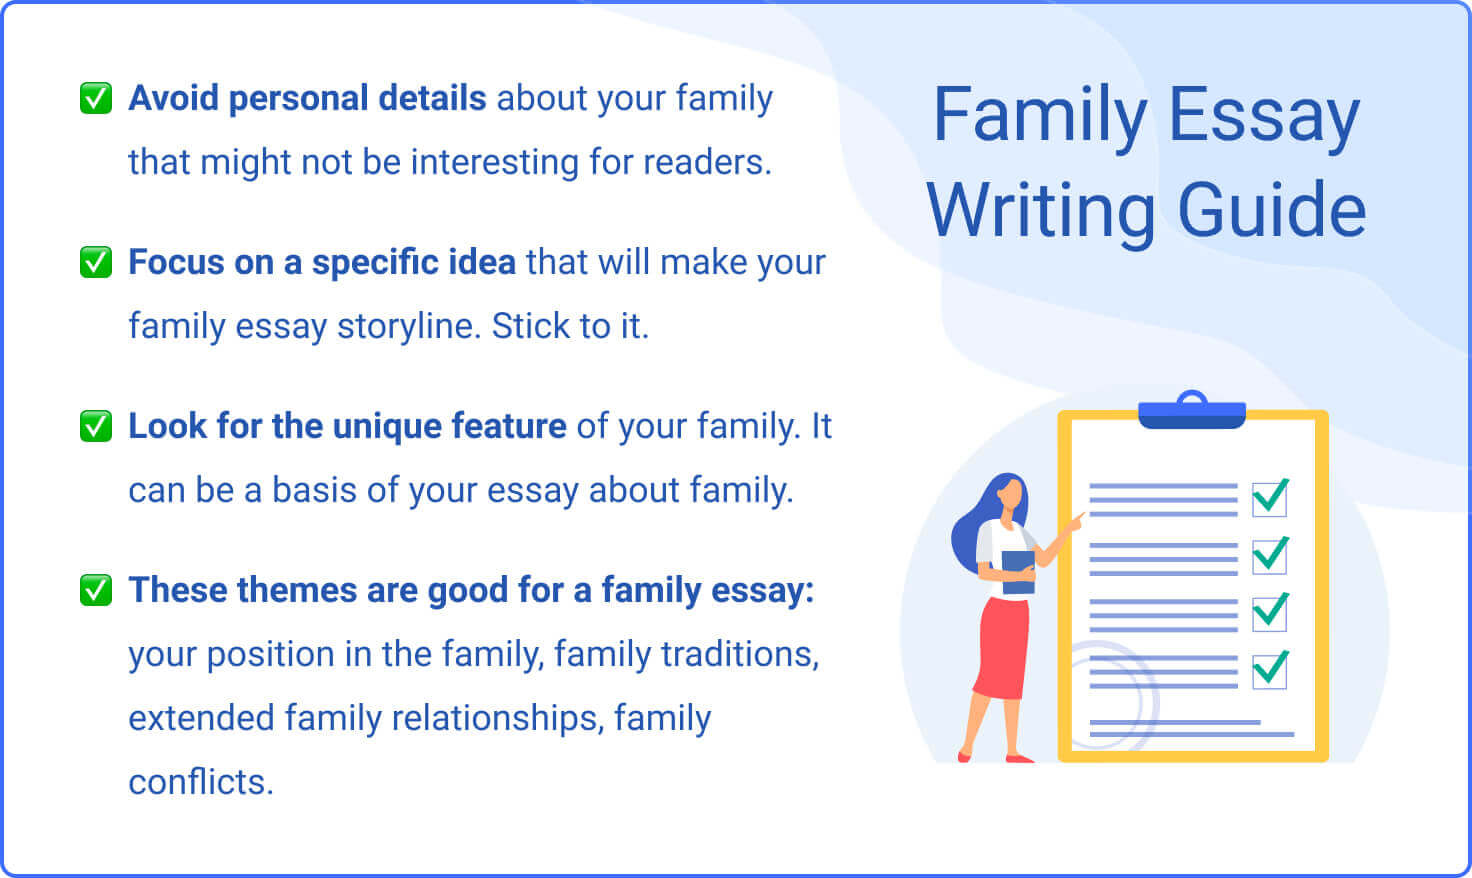 The picture provides tips for writing an essay about family.